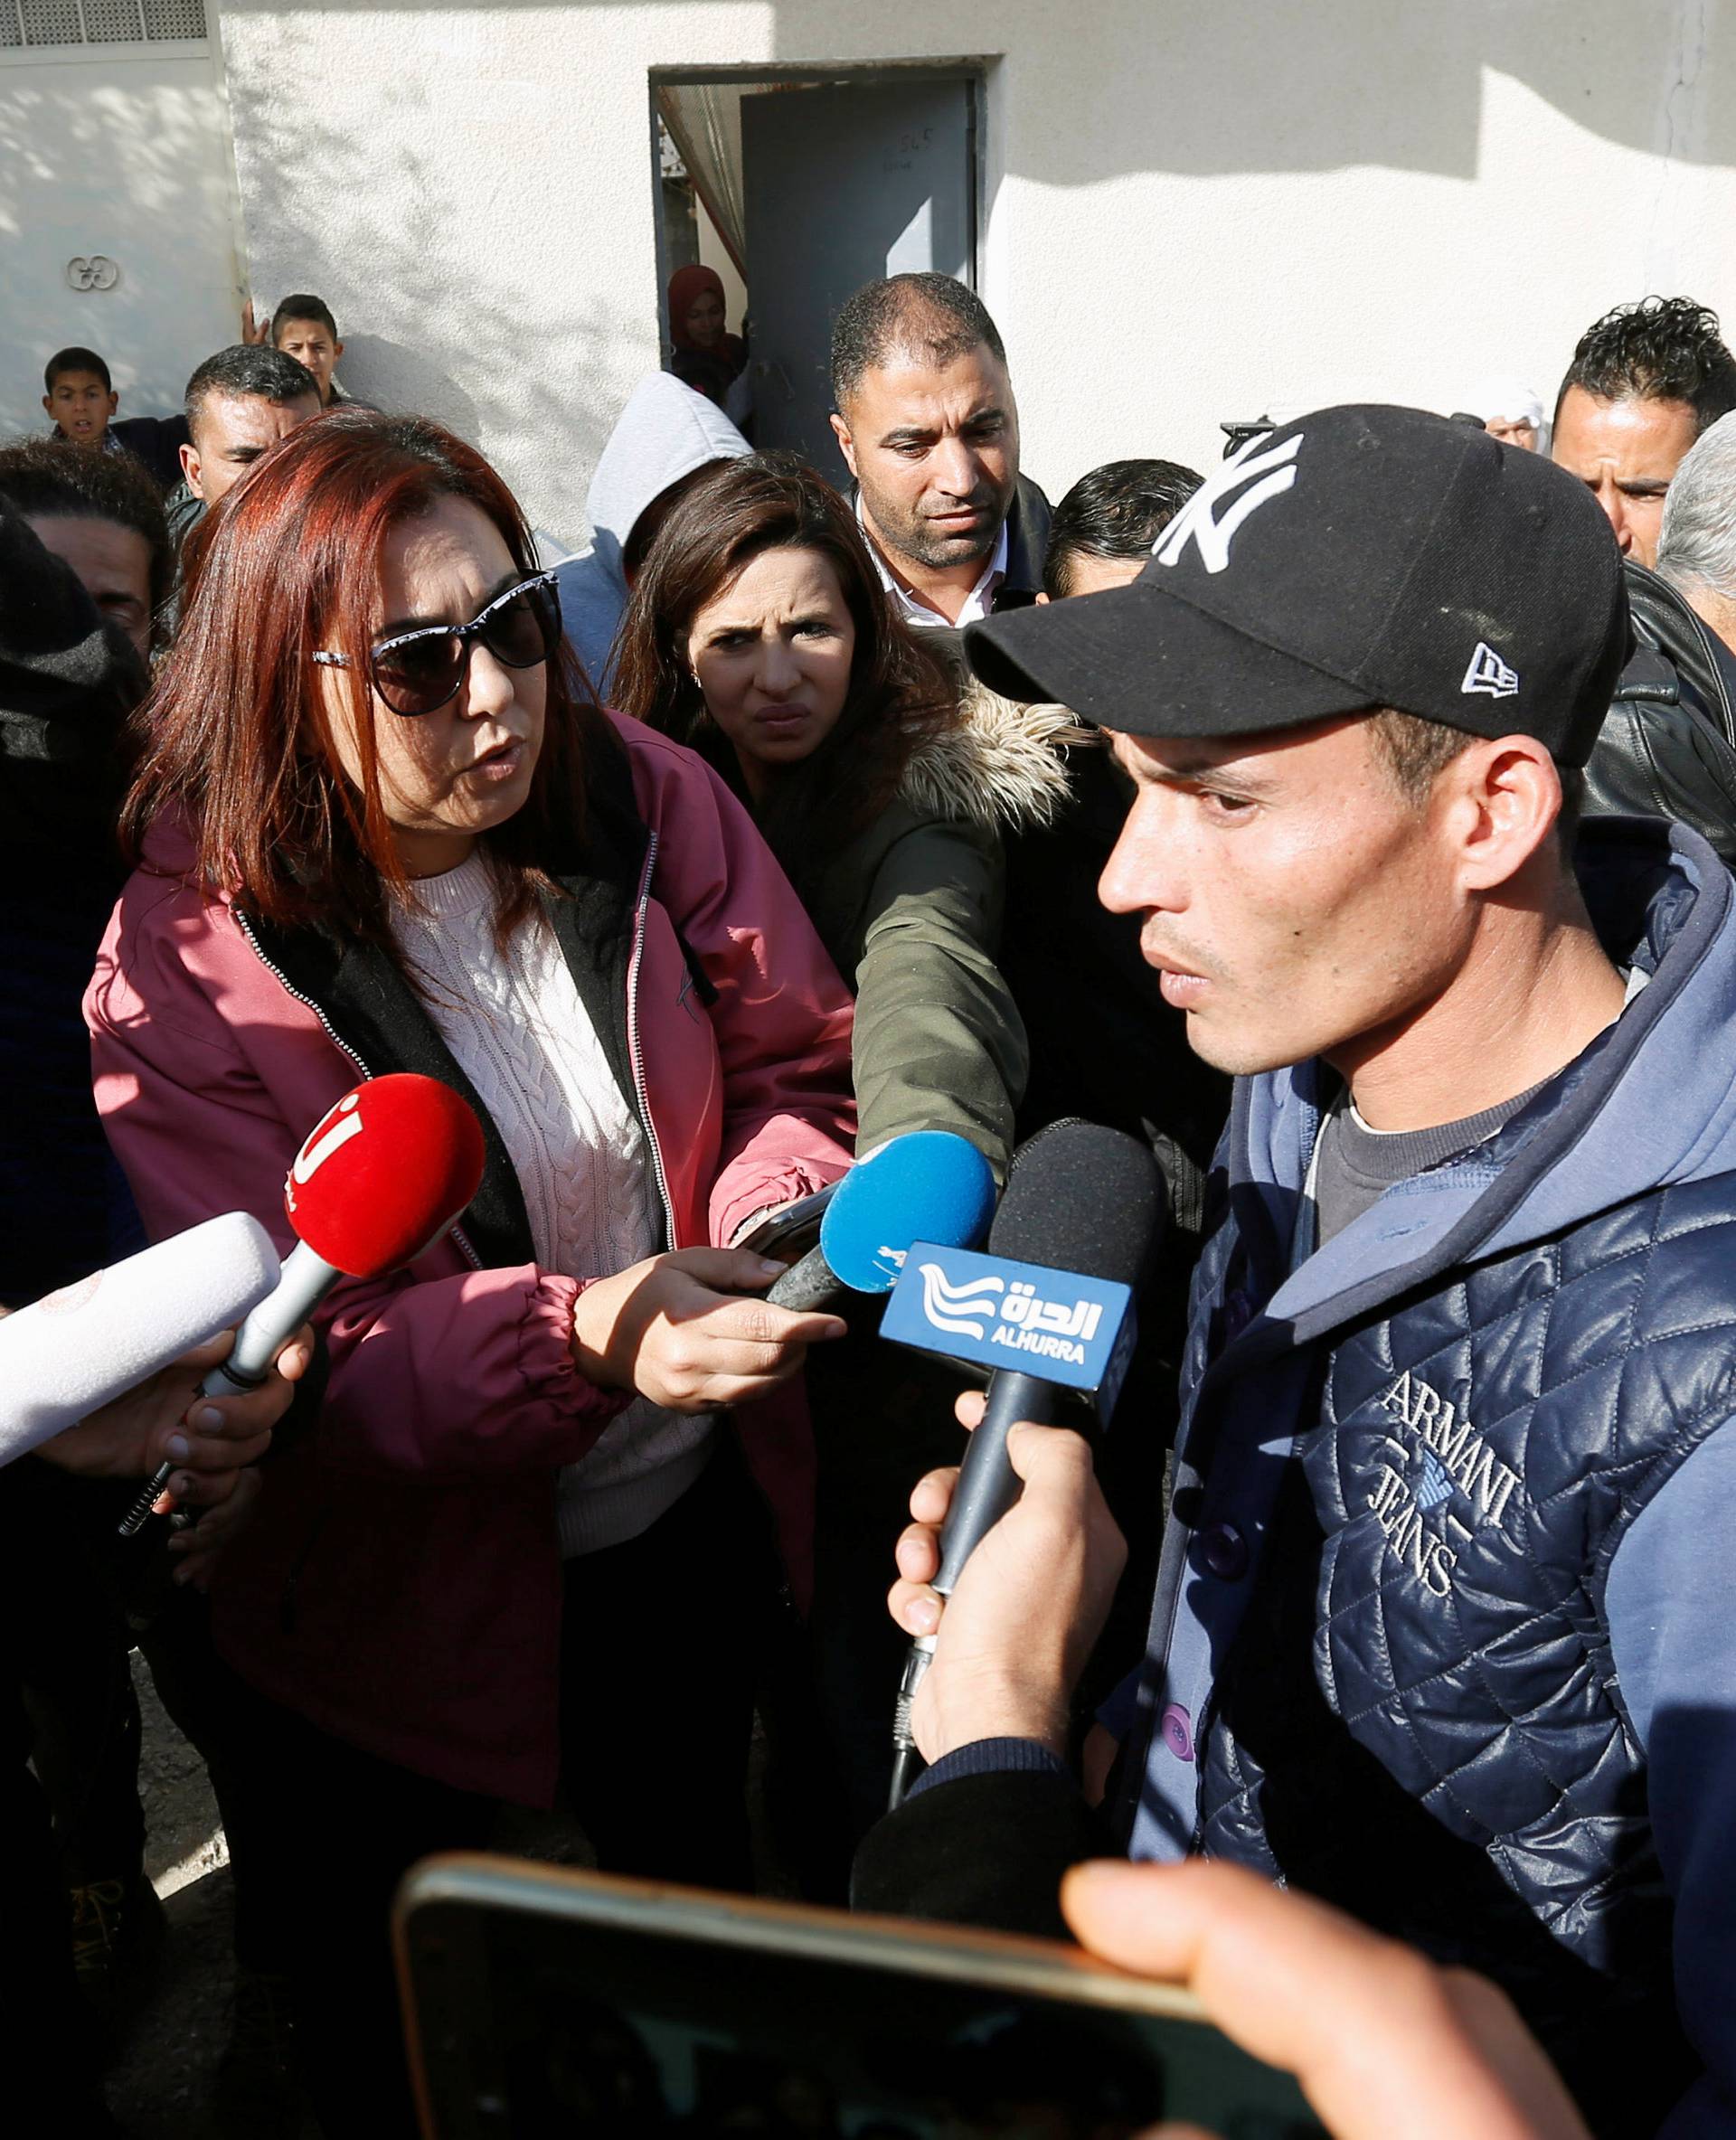 Walid, brother of suspect Anis Amri who is sought in relation with the truck attack on a Christmas market in Berlin, speaks to members of the media near their home in Oueslatia, Tunisia